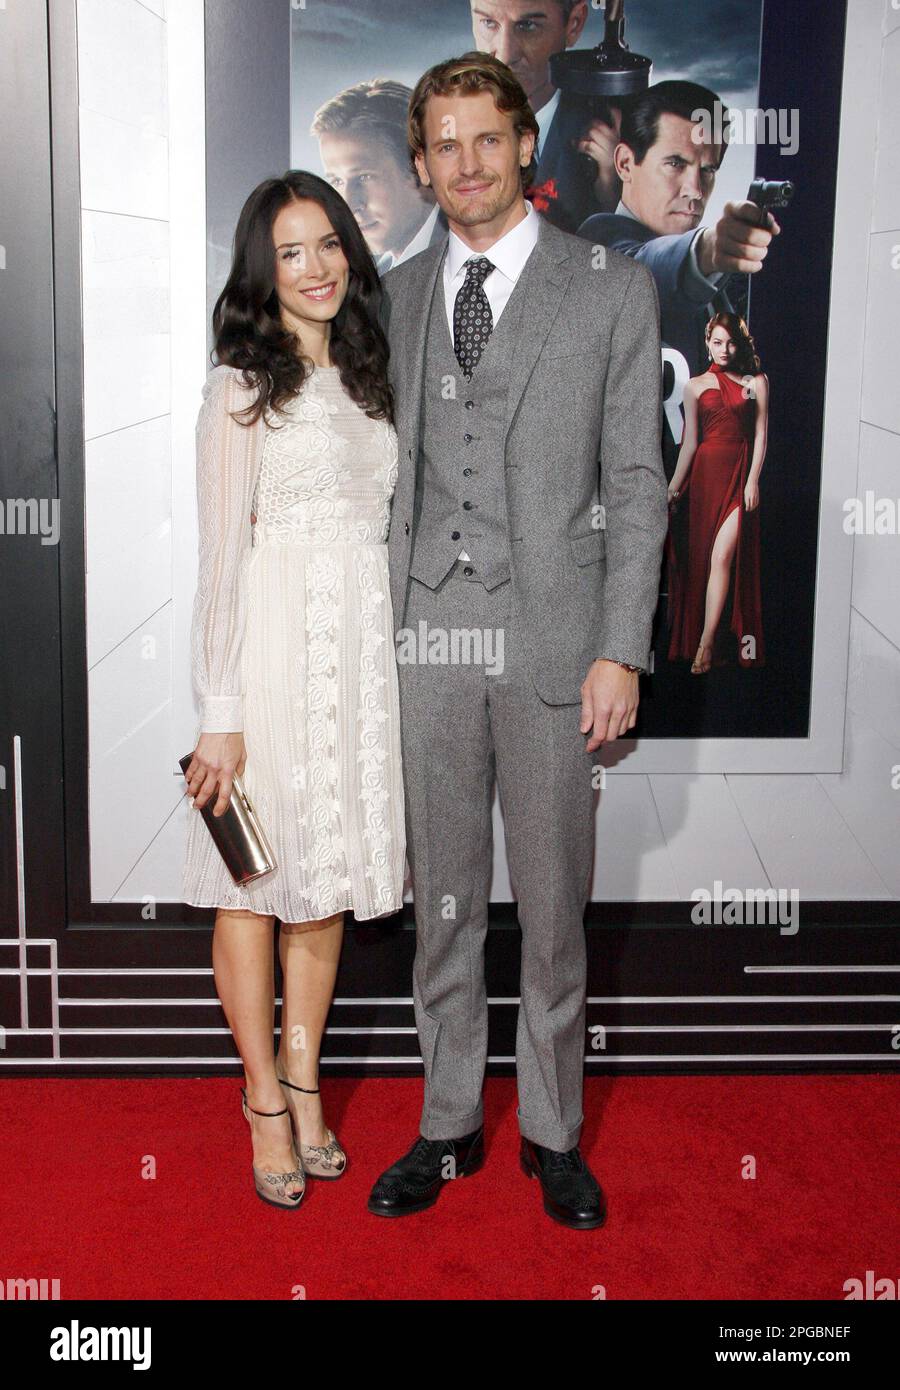 Abigail Spencer and Josh Pence at the Los Angeles premiere of 'Gangster Squad' held at the Grauman's Chinese Theatre in Hollywood on January 7, 2013. Stock Photo